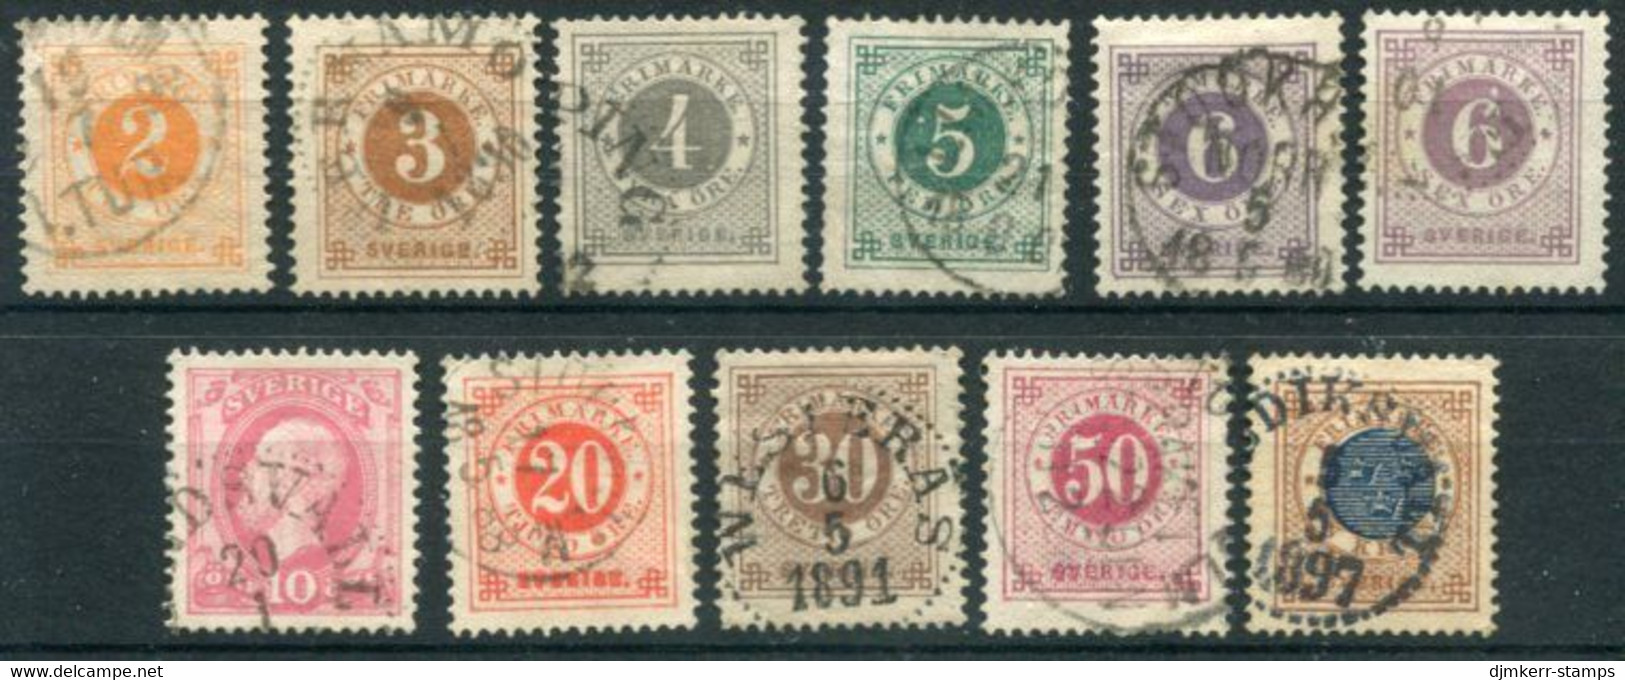 SWEDEN 1886 Definitive Set With Posthorn On Back, Used. Michel 29-38 - Used Stamps